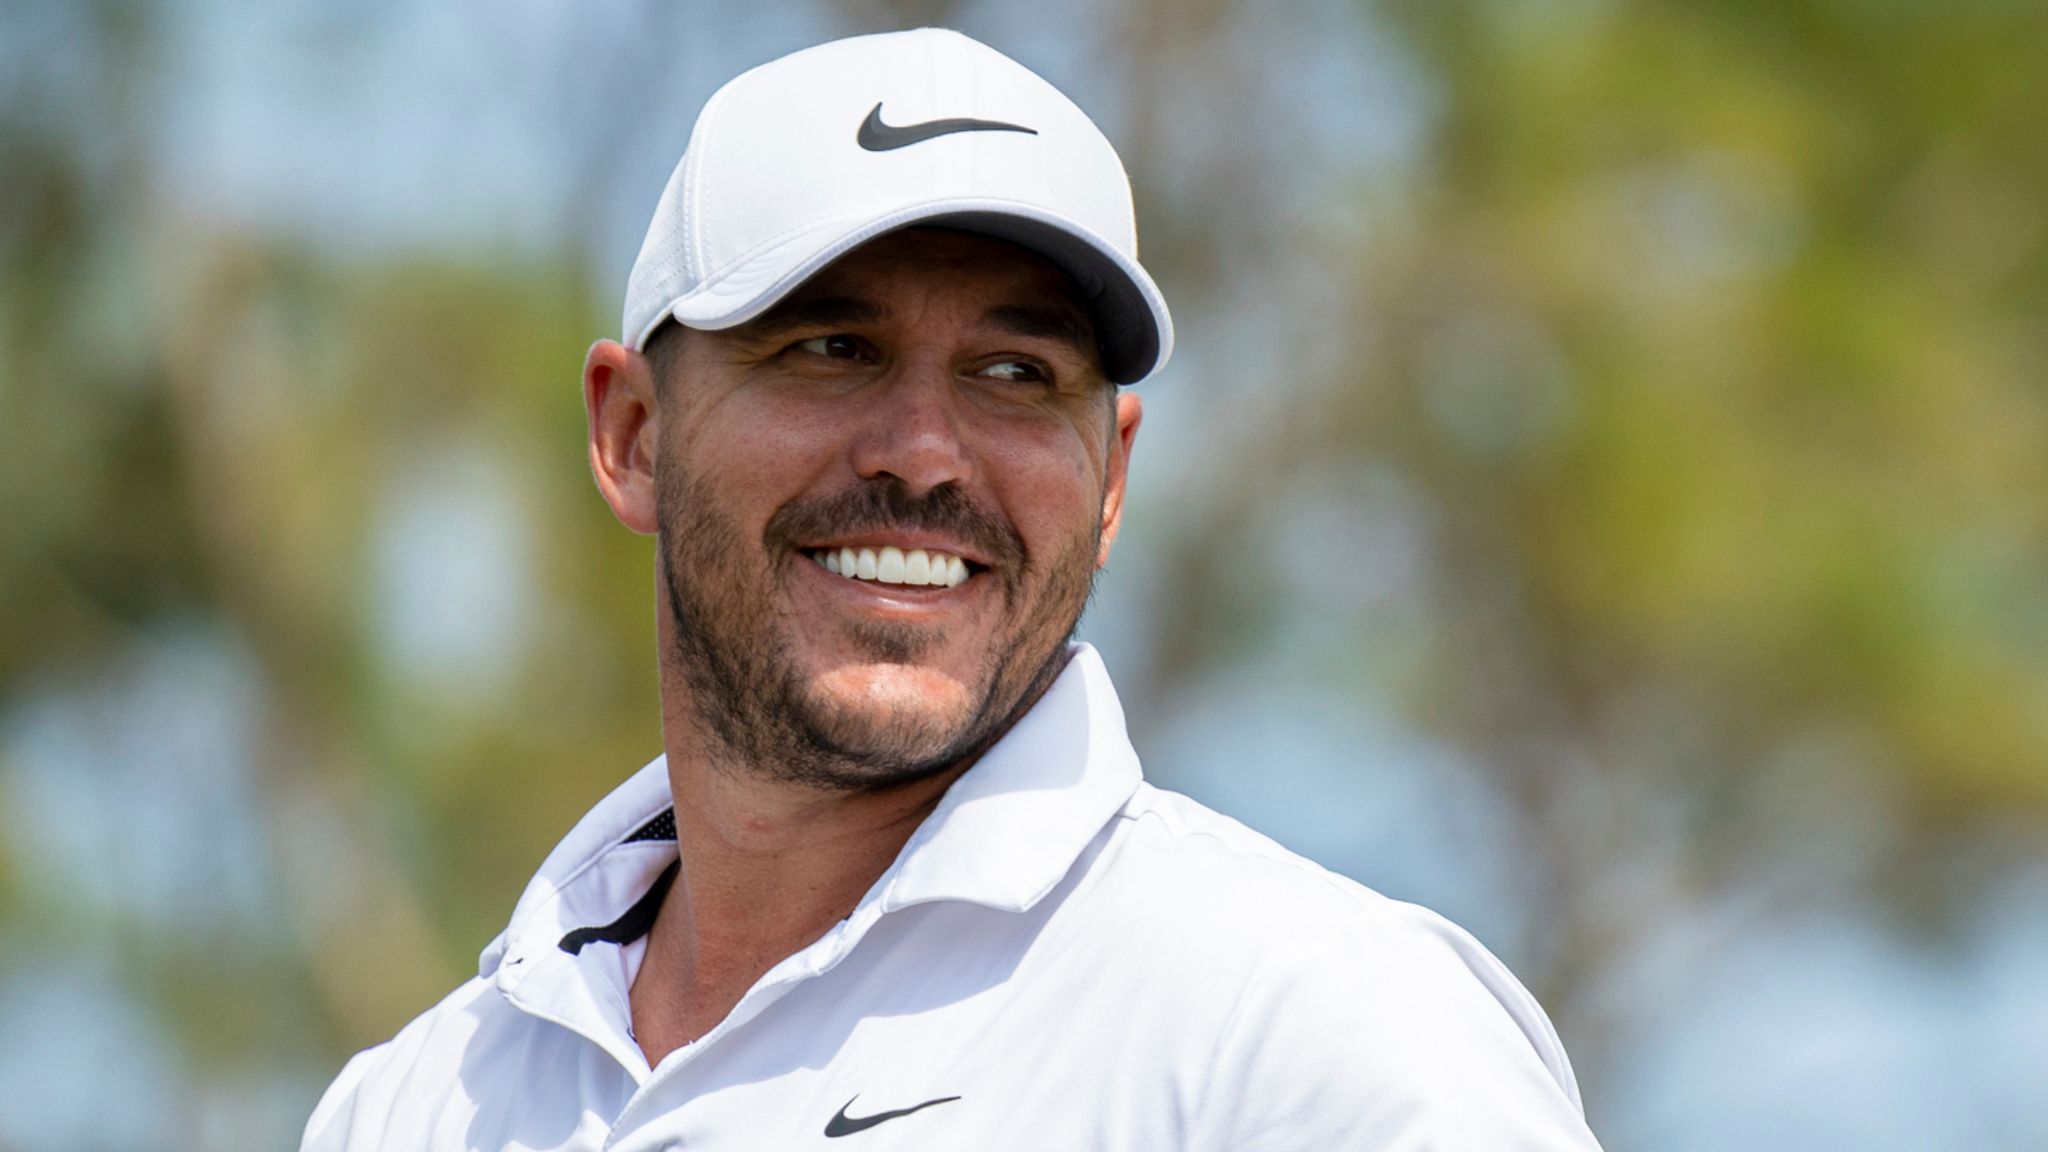 The Masters Brooks Koepka ready for Augusta National after latest LIV Golf victory in Orlando Golf News Sky Sports